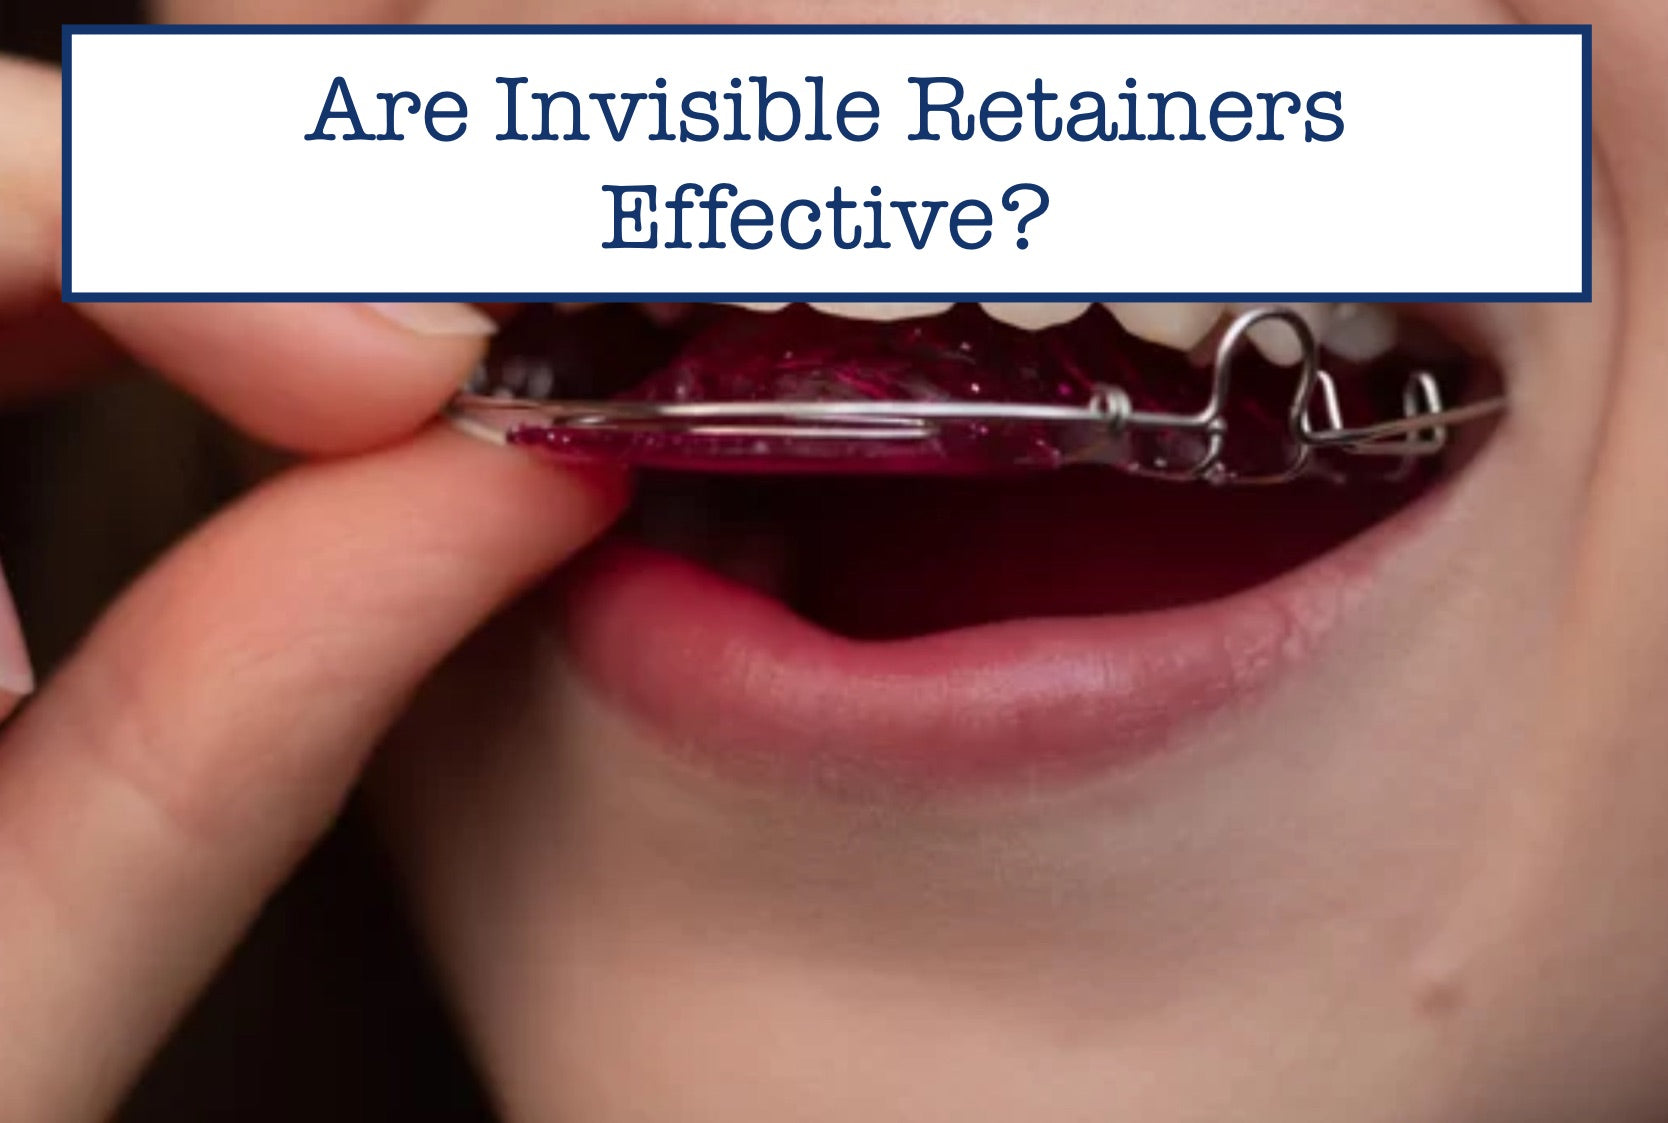 Are Invisible Retainers Effective?